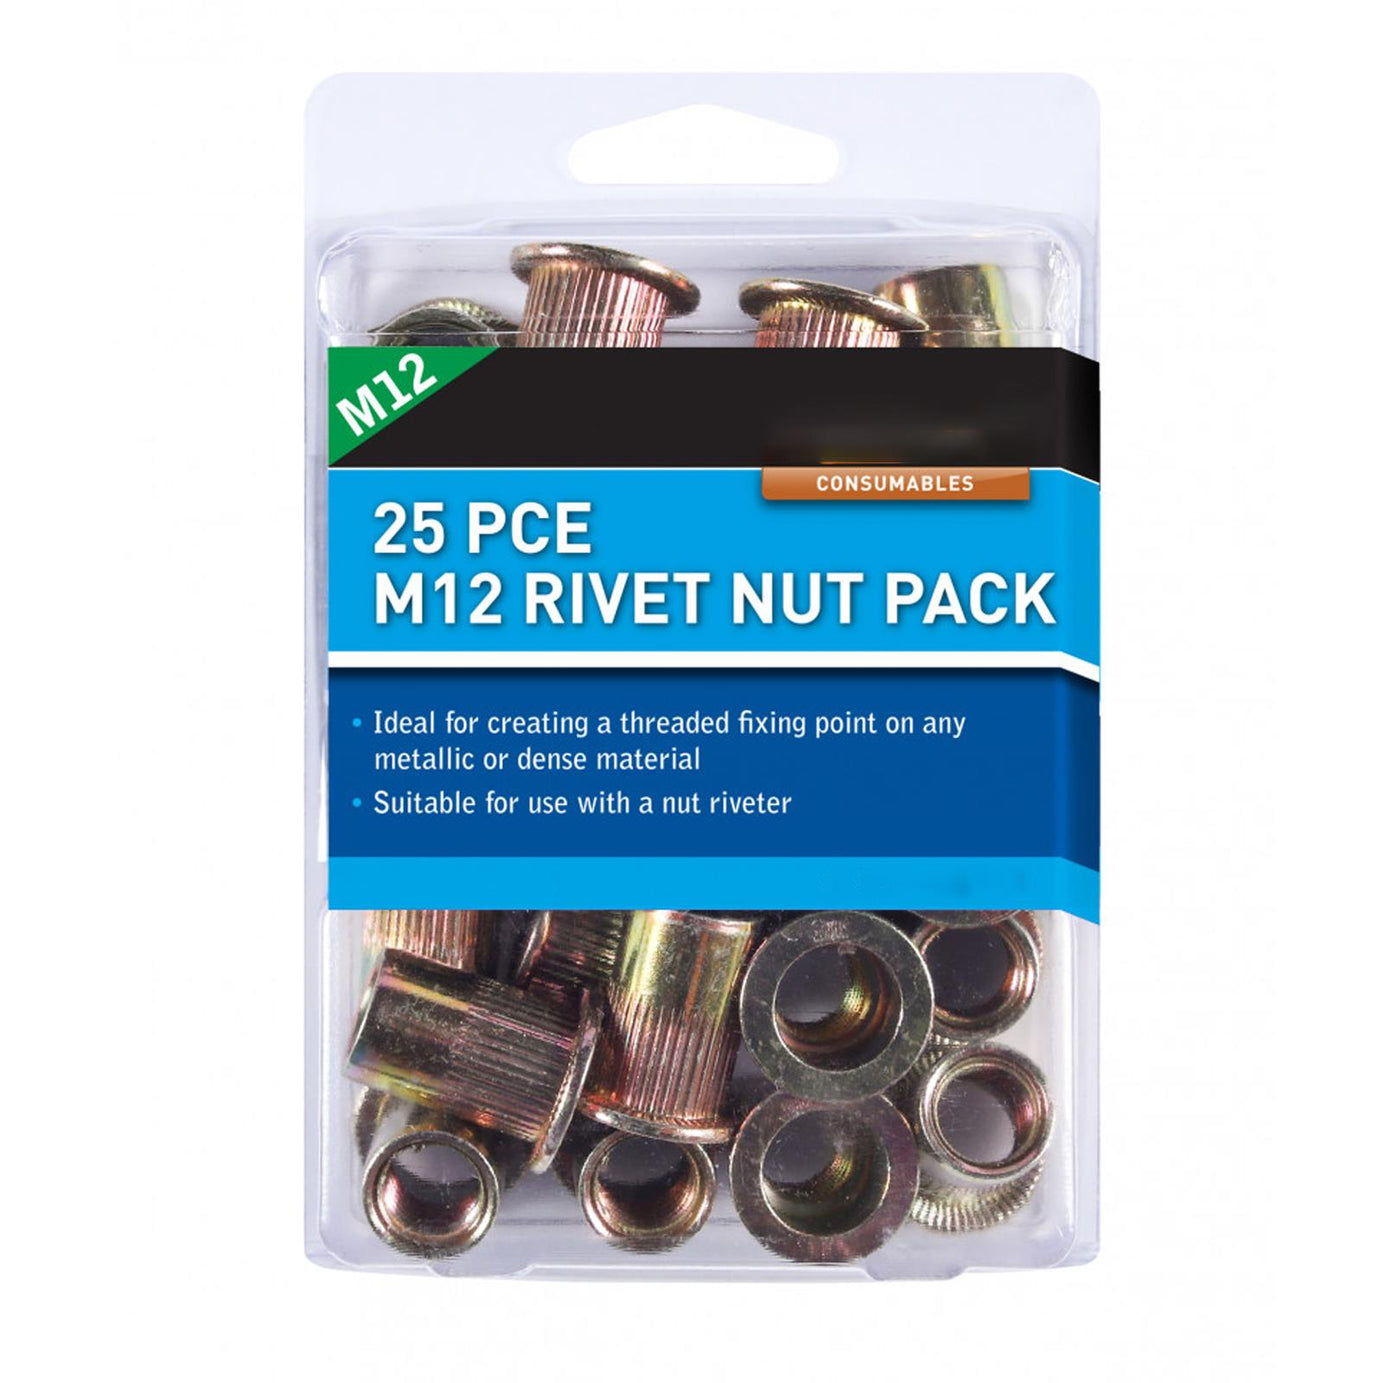 BlueSpot 25Pce High Quality M12 Rivet Nut Pack For Nut Riveter Use Metal Thread Fixing